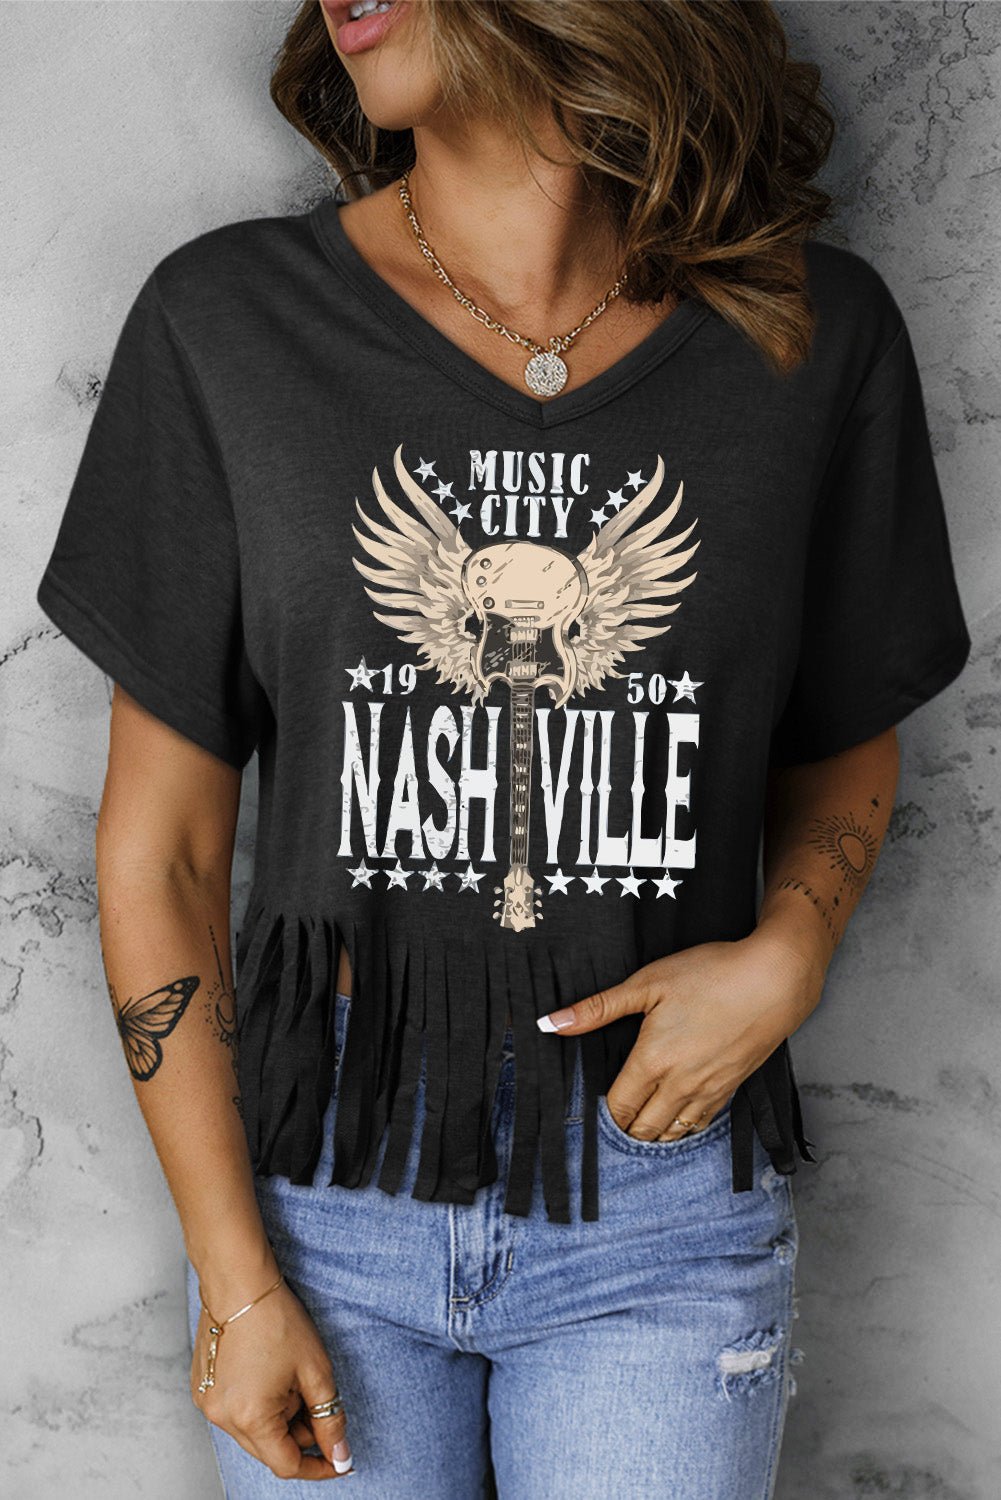 Music City 1950 Nashville Graphic Fringe Hem Tee - Let Nashville's Romance Embrace You - Fall in Love with Luxurious Comfort and Bohemian Sophistication - Guy Christopher